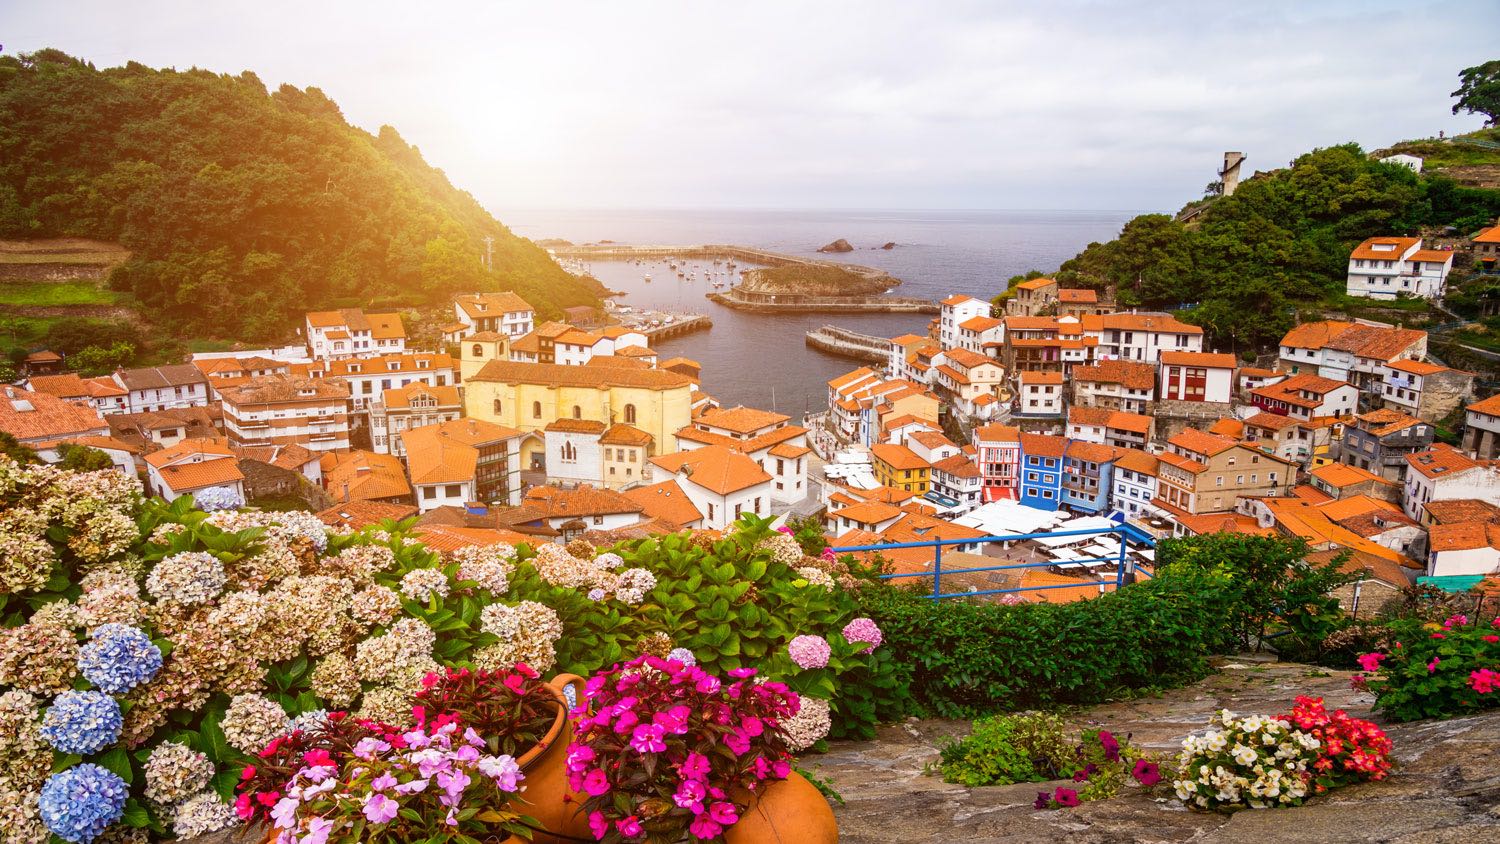 How to Explore Cudillero, Spain’s Most Colourful Tiny Seaside Town